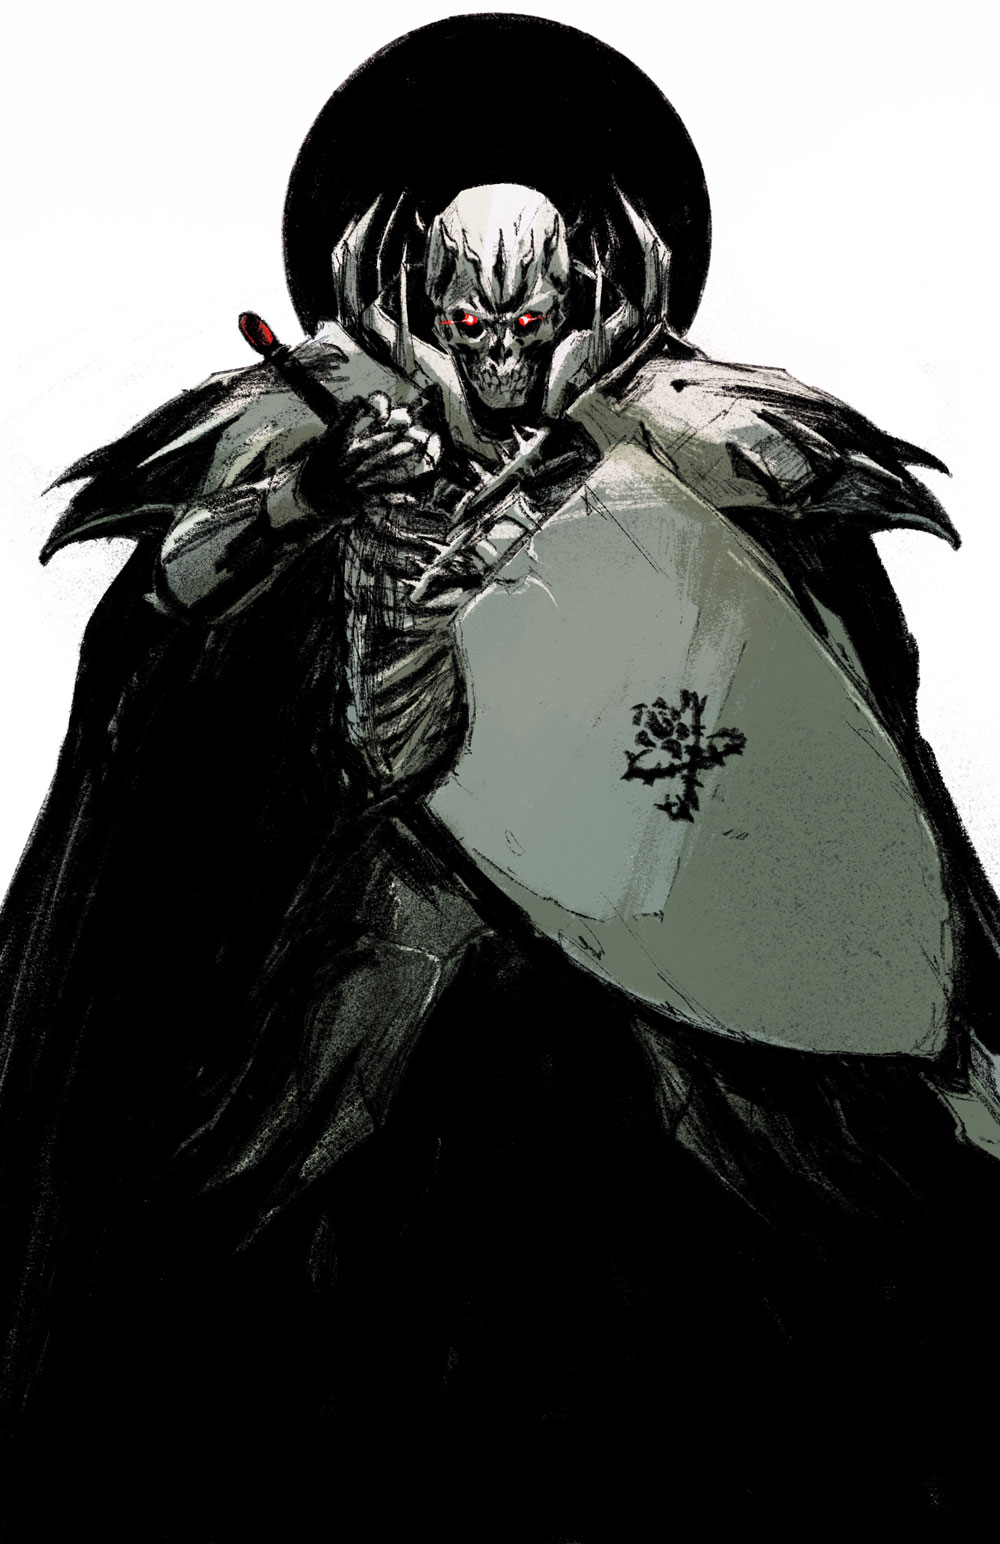 berserk - Why is it that the Skull Knight and Void are against each other?  - Anime & Manga Stack Exchange